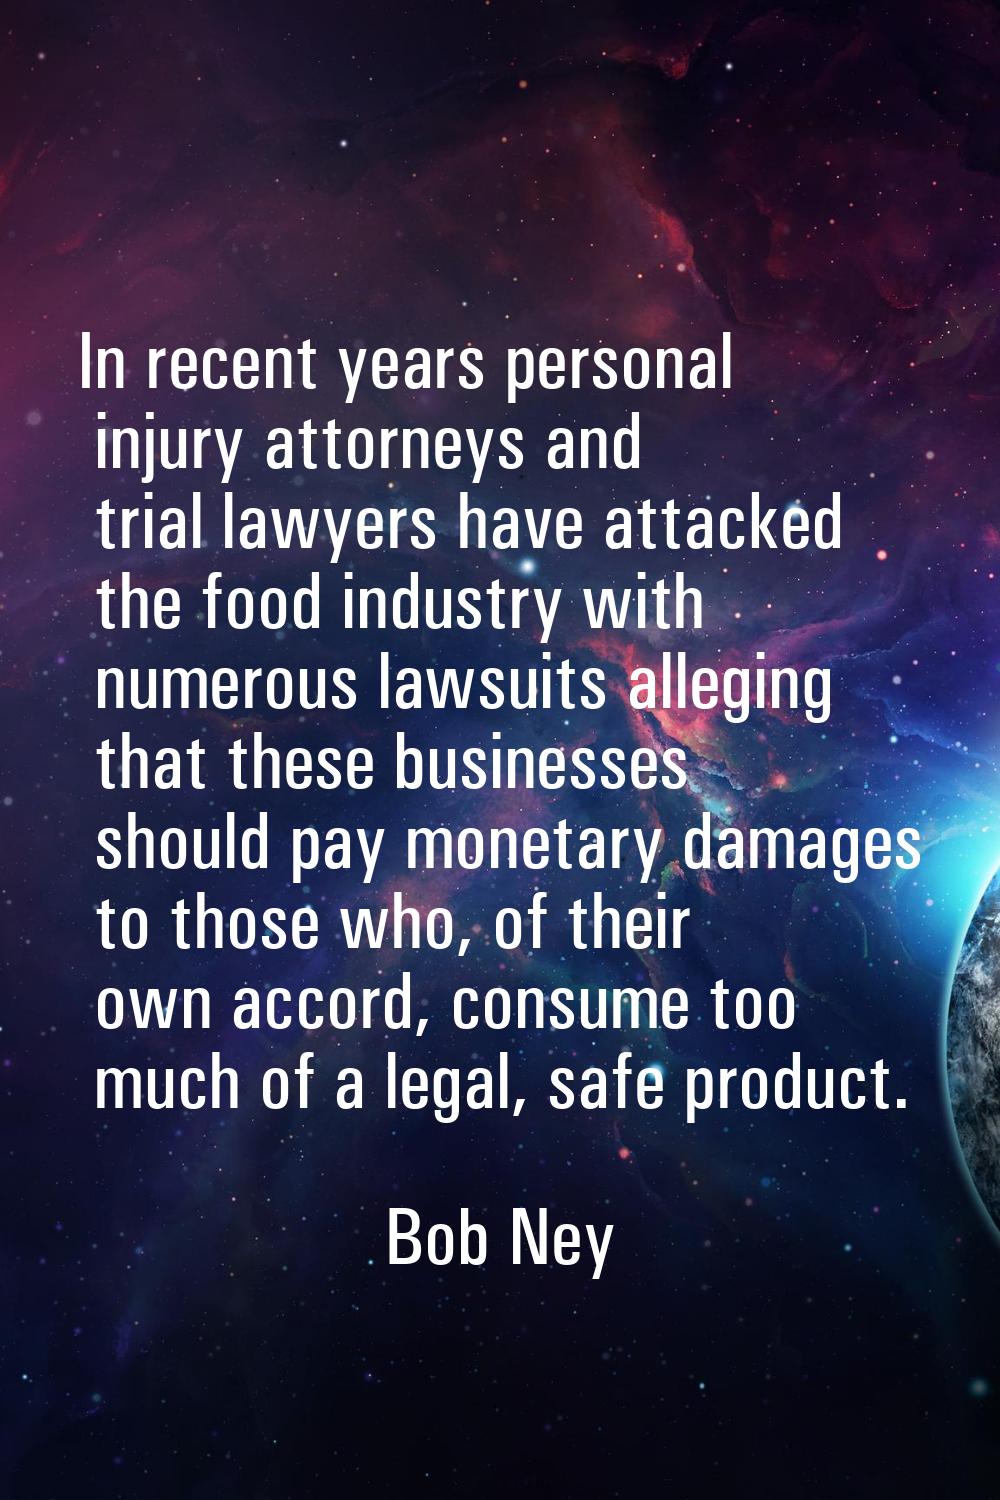 In recent years personal injury attorneys and trial lawyers have attacked the food industry with nu